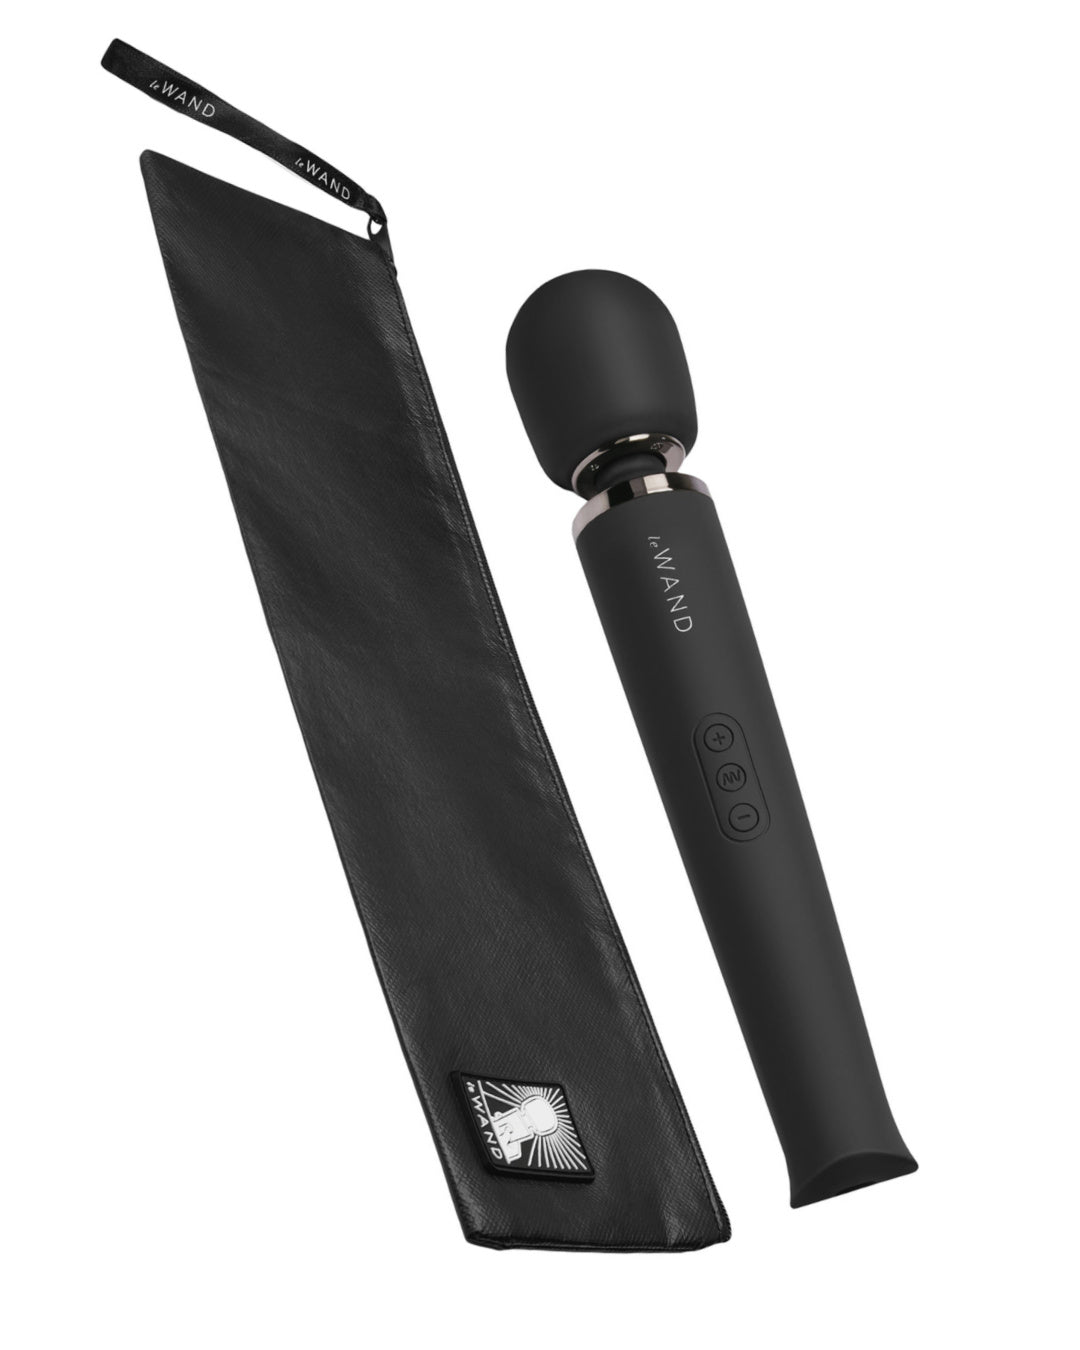 Le Wand Cordless Vibrating Massager - Black with its matching zip up travel bag on a white background